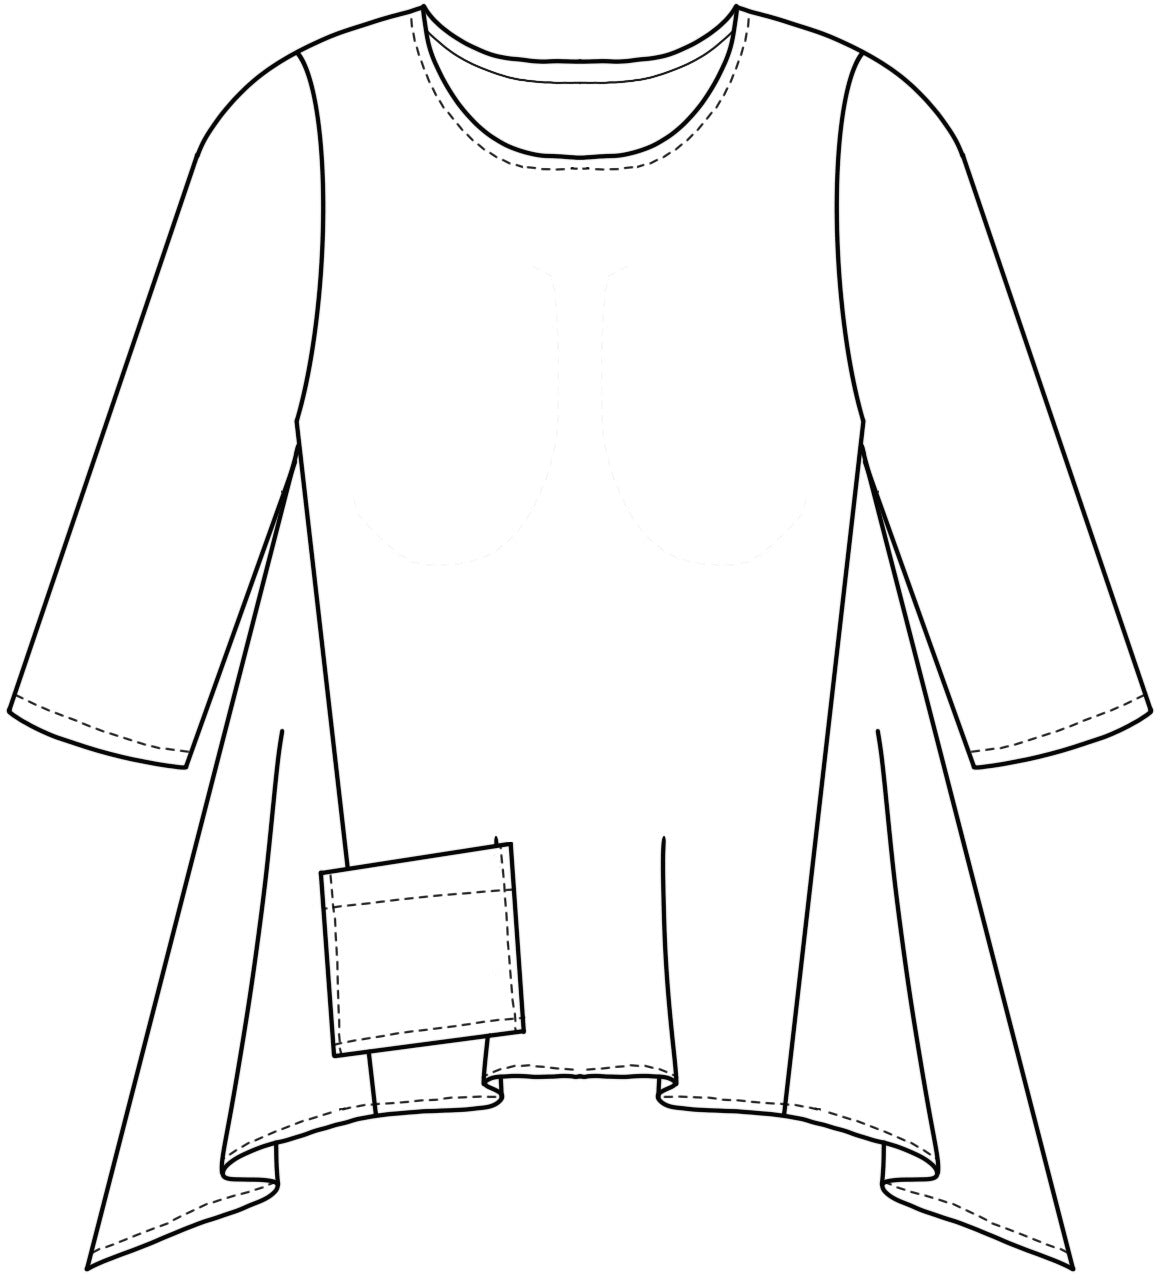 drawing of a pull over top with a full flowy body and a single square hip pocket. sleeves are 3/4 length and the hemline of the body is lower on the sides with a point. 